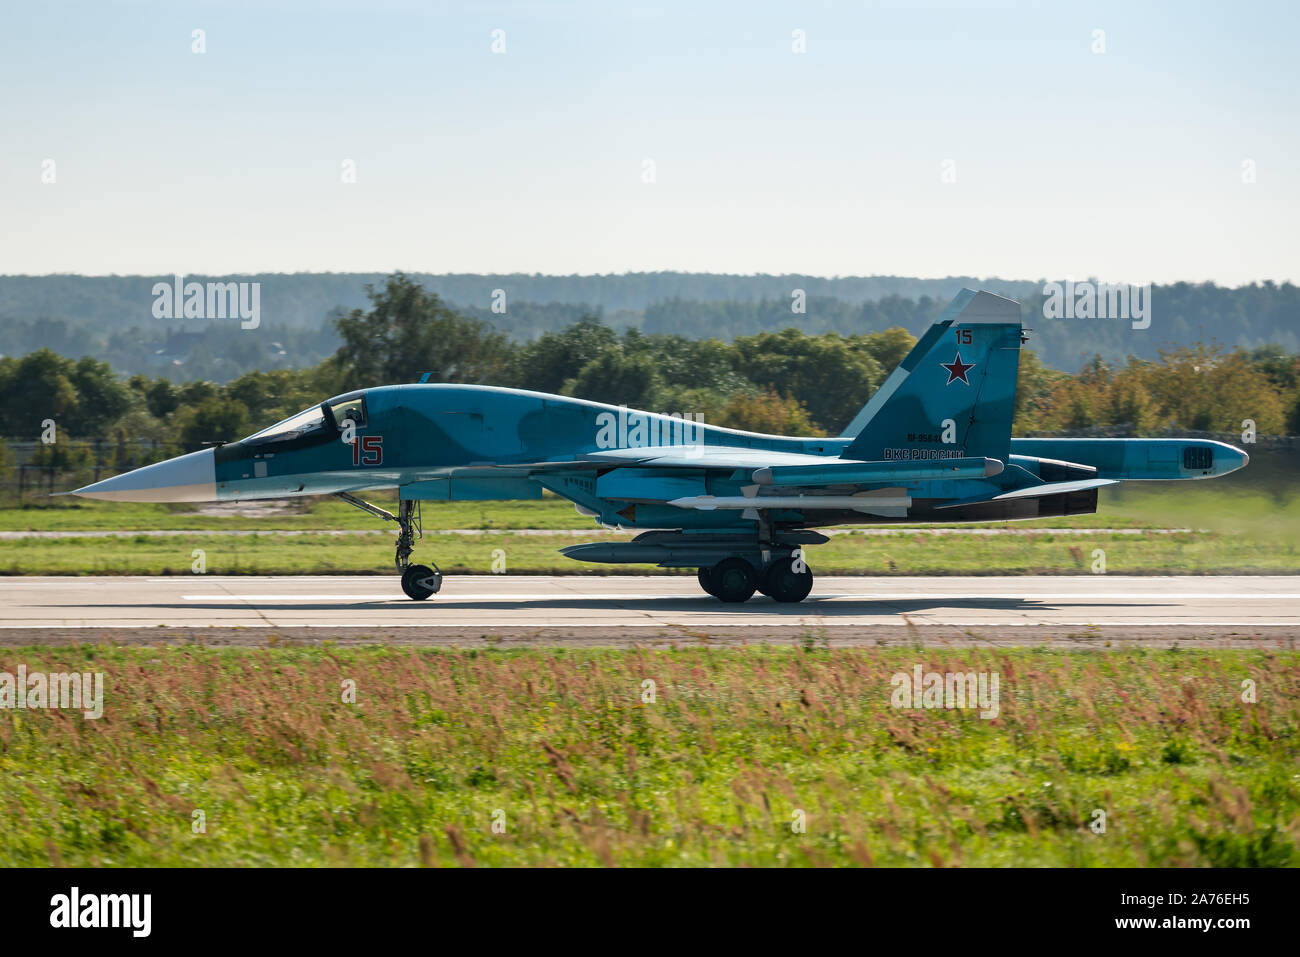 A Sukhoi Su-34 twin-seat, all-weather supersonic medium-range fighter-bomber/strike aircraft of the Russian Air Force. Stock Photo